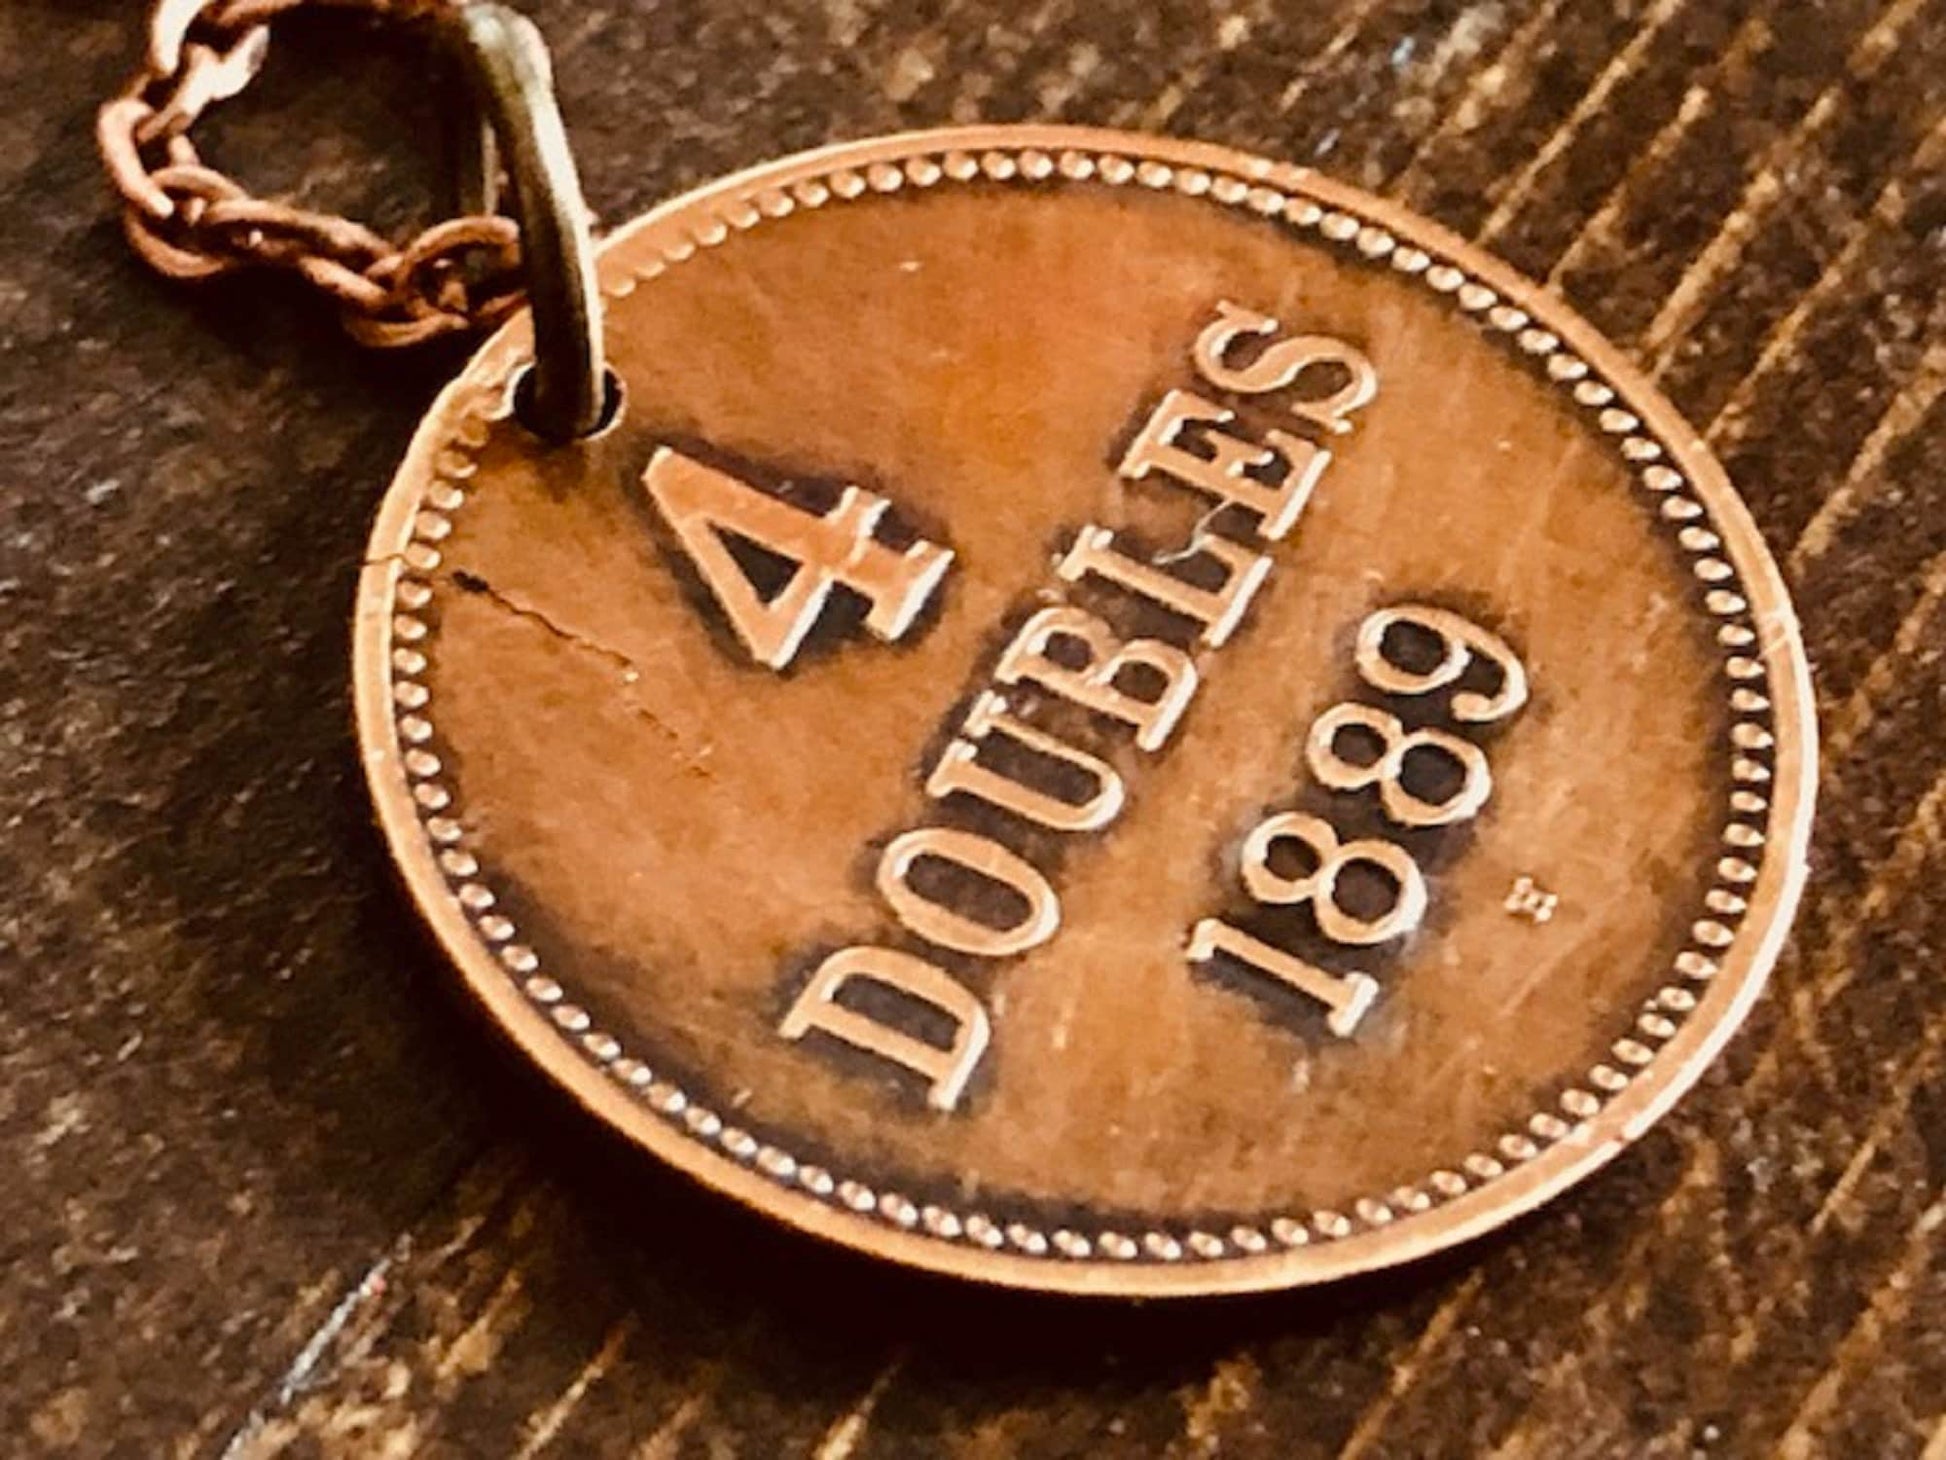 Guernesey Coin Necklace Pendant 4 Doubles Personal Old Vintage Handmade Jewelry Gift Friend Charm For Him Her World Coin Collector